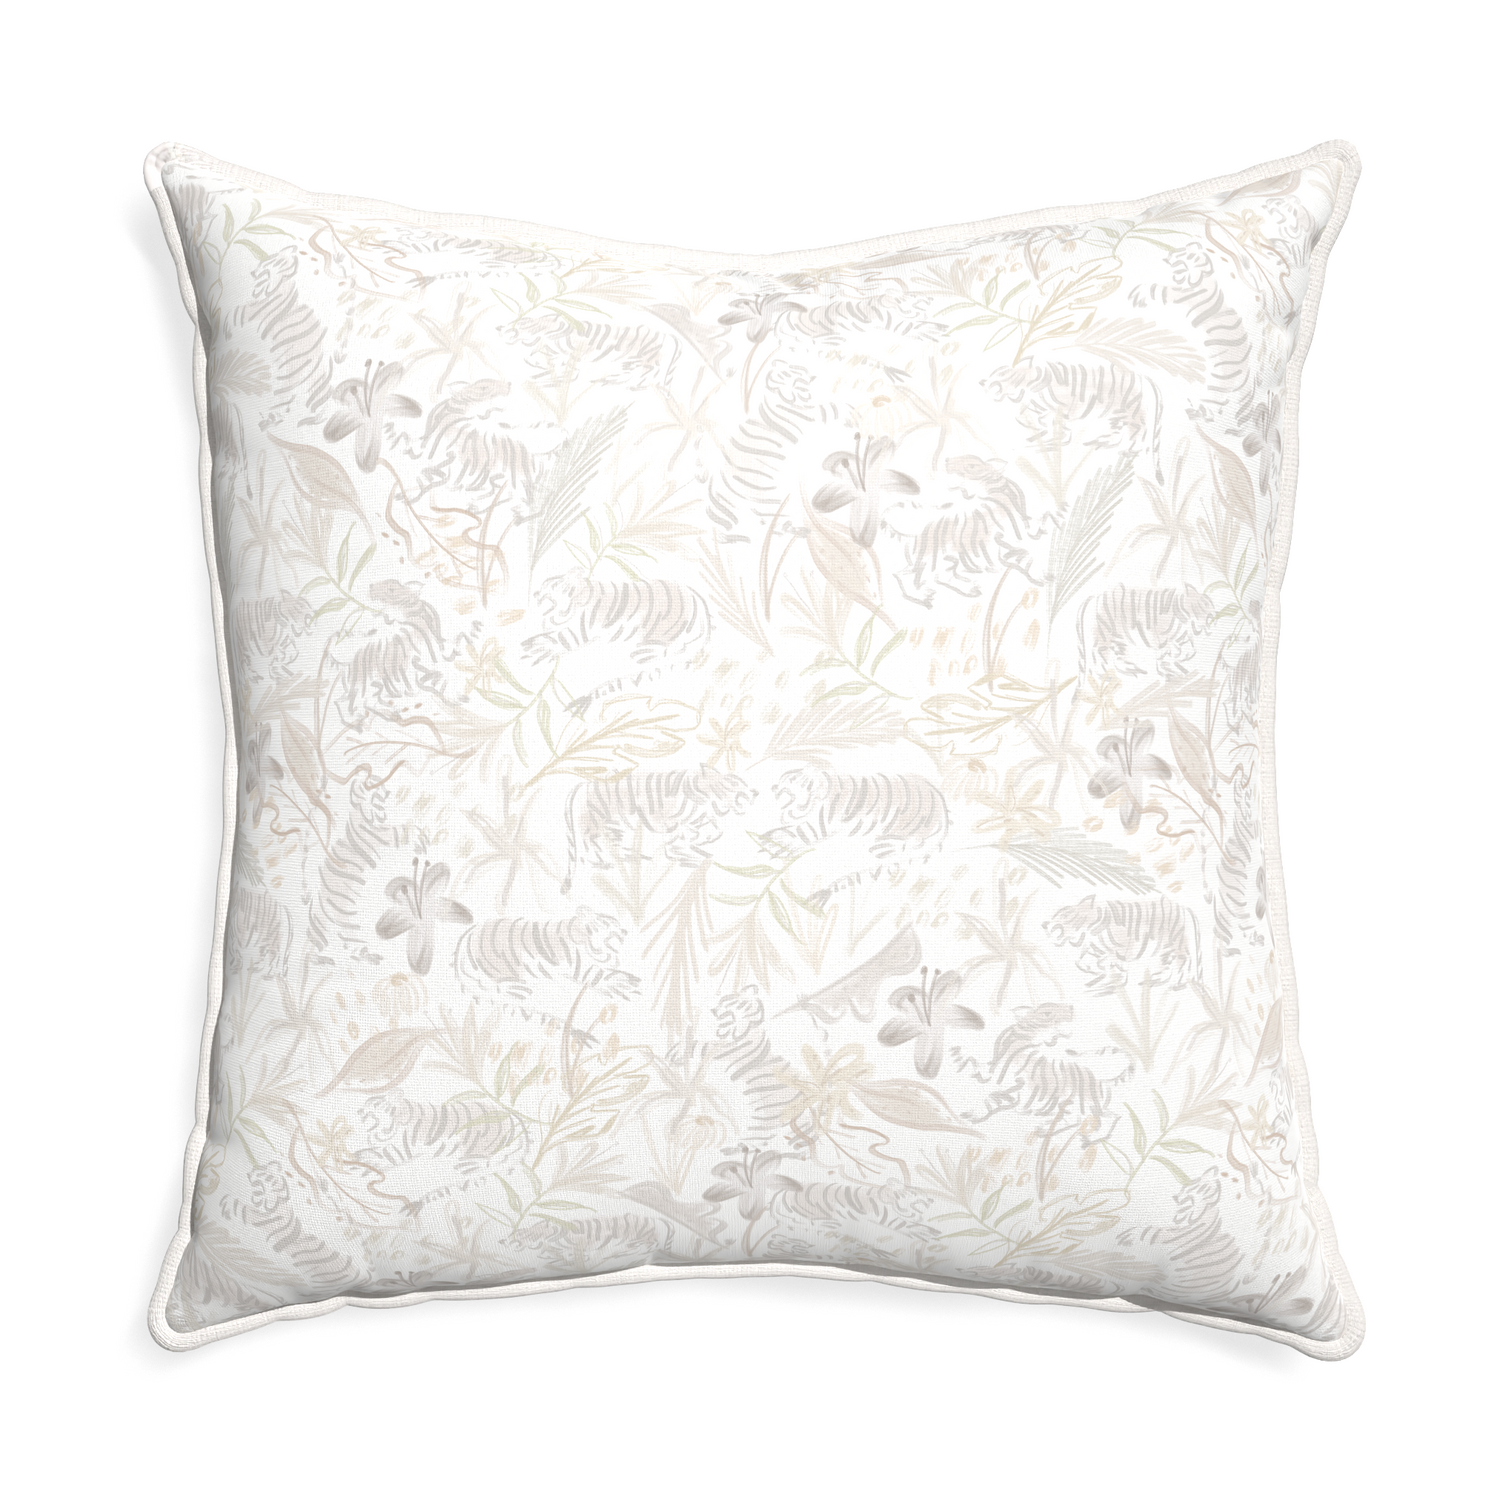 Euro-sham frida sand custom pillow with snow piping on white background